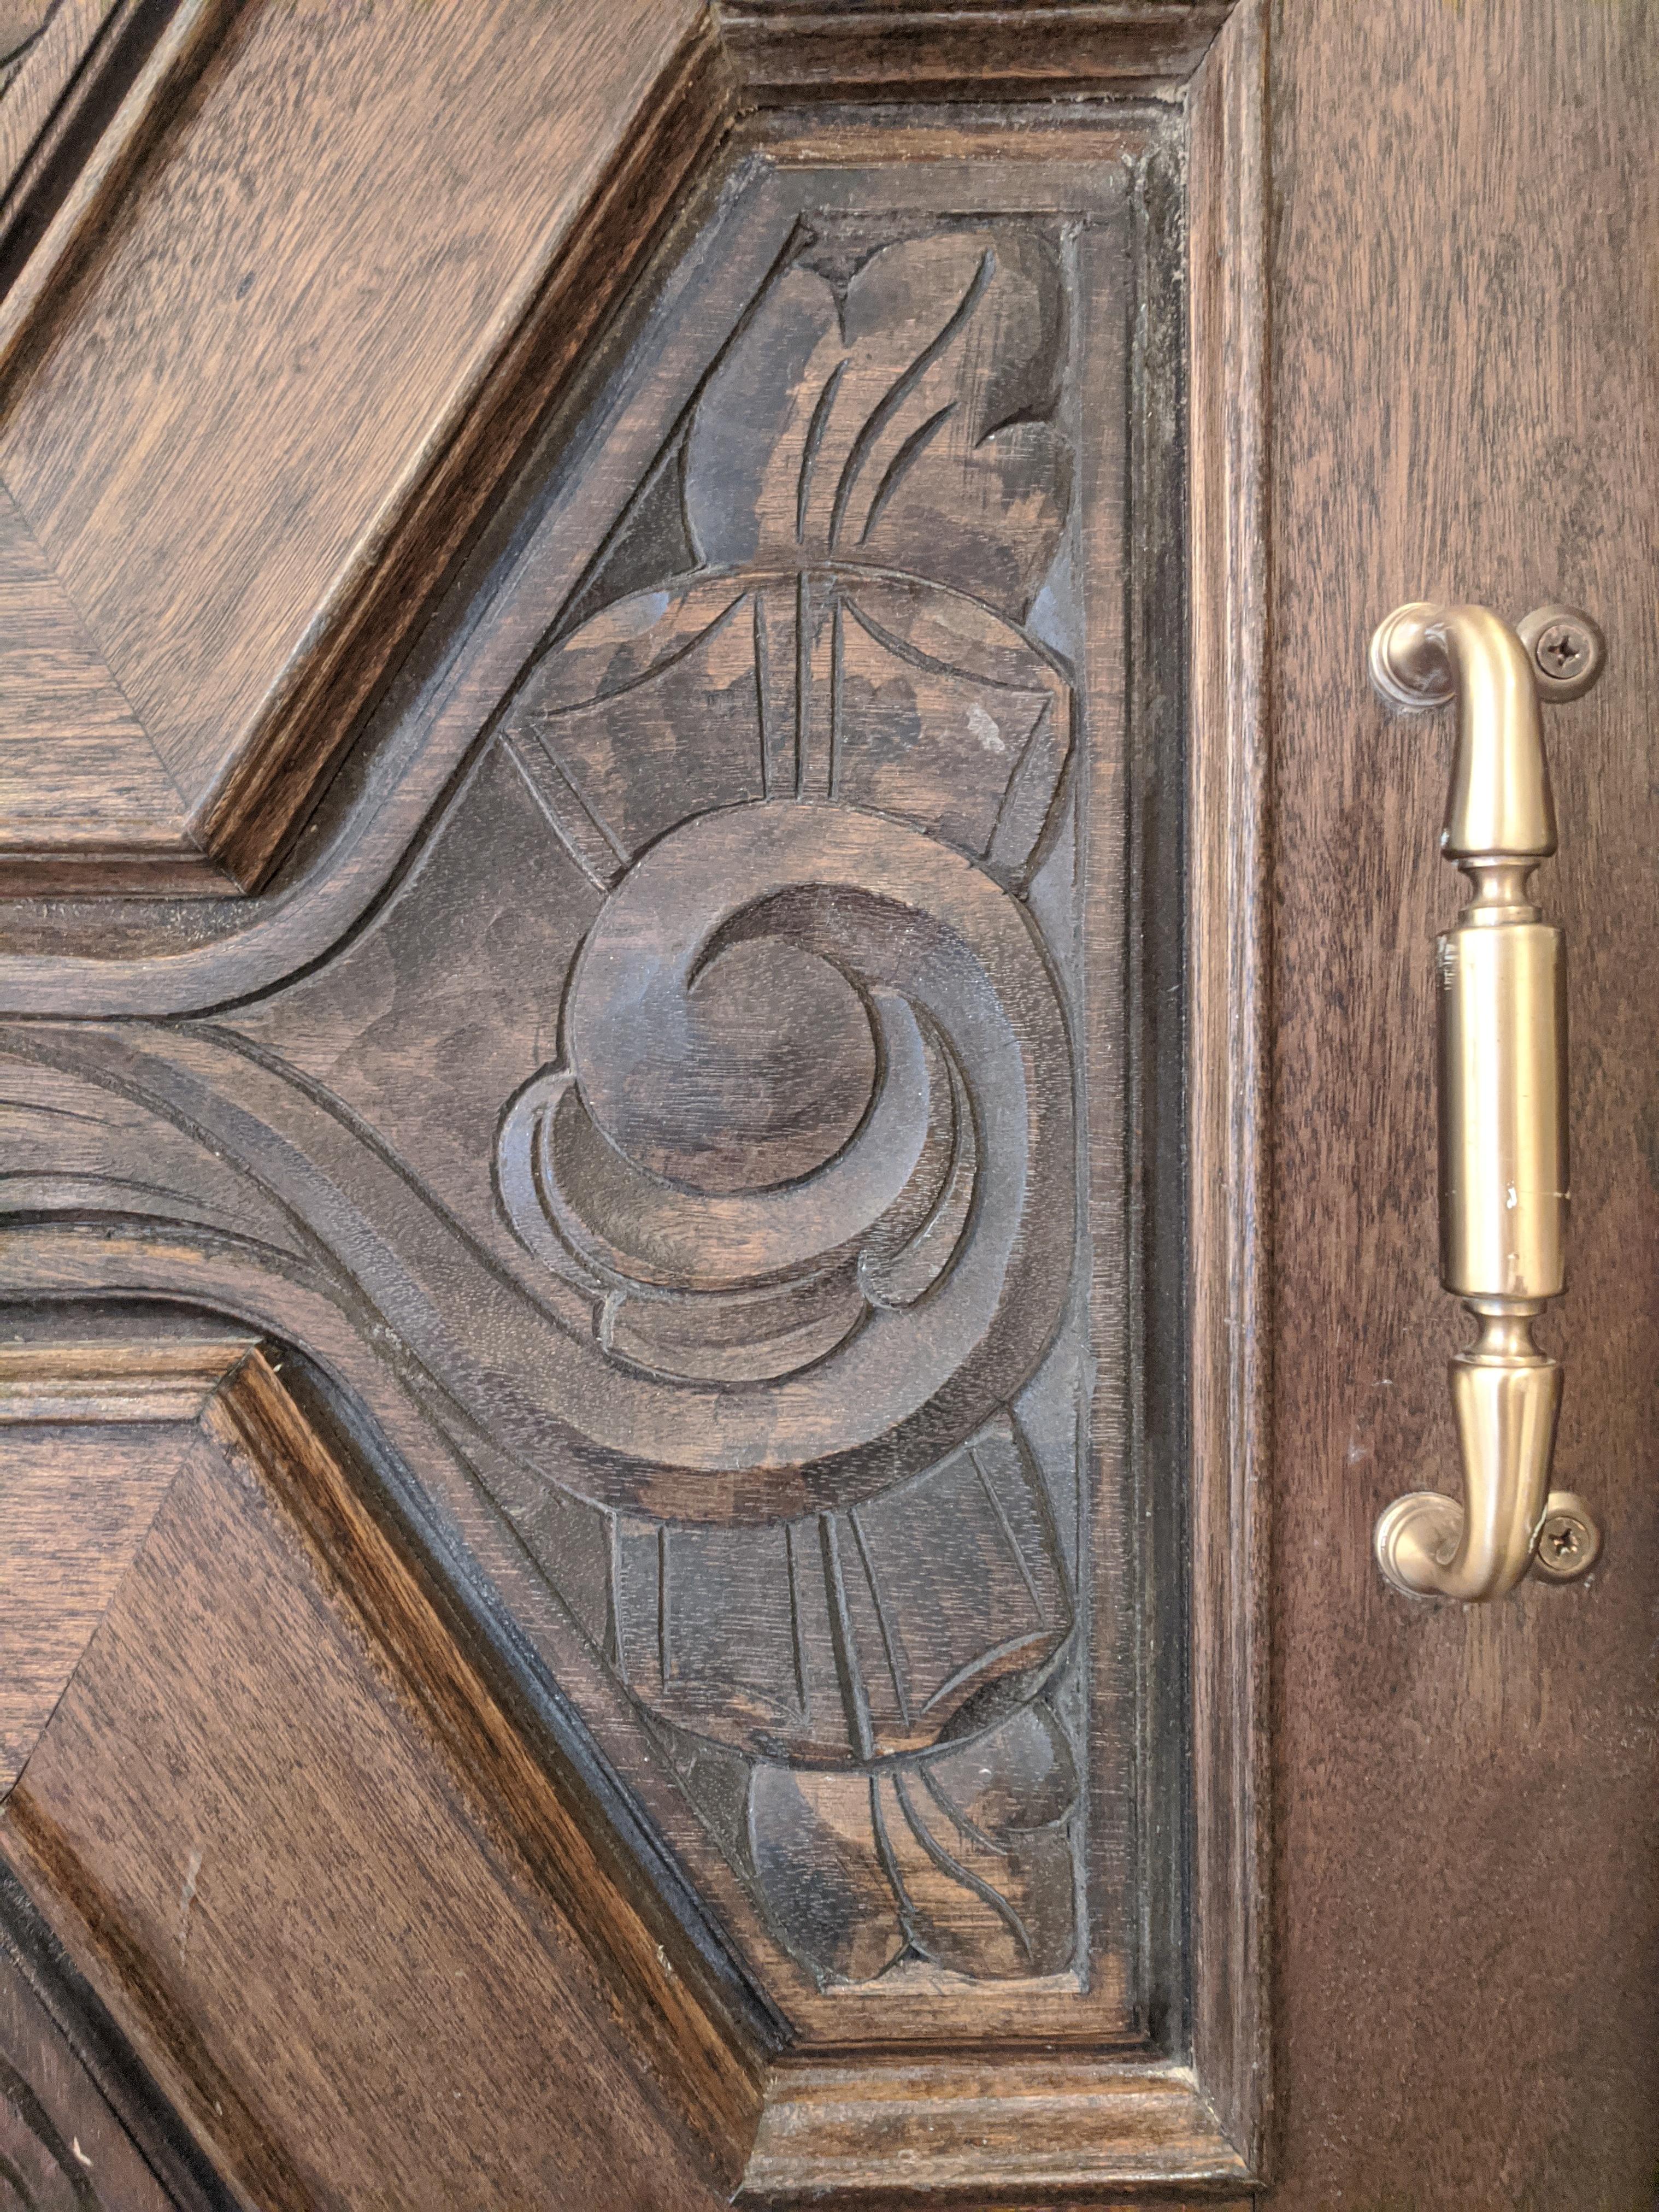 These massive wooden doors make a strong statement wherever they are placed. Hand carved with panels of an art-deco design, they are stained in a walnut color. The precise wood used is undetermined. Each door weighs between 60-70pounds. The doors